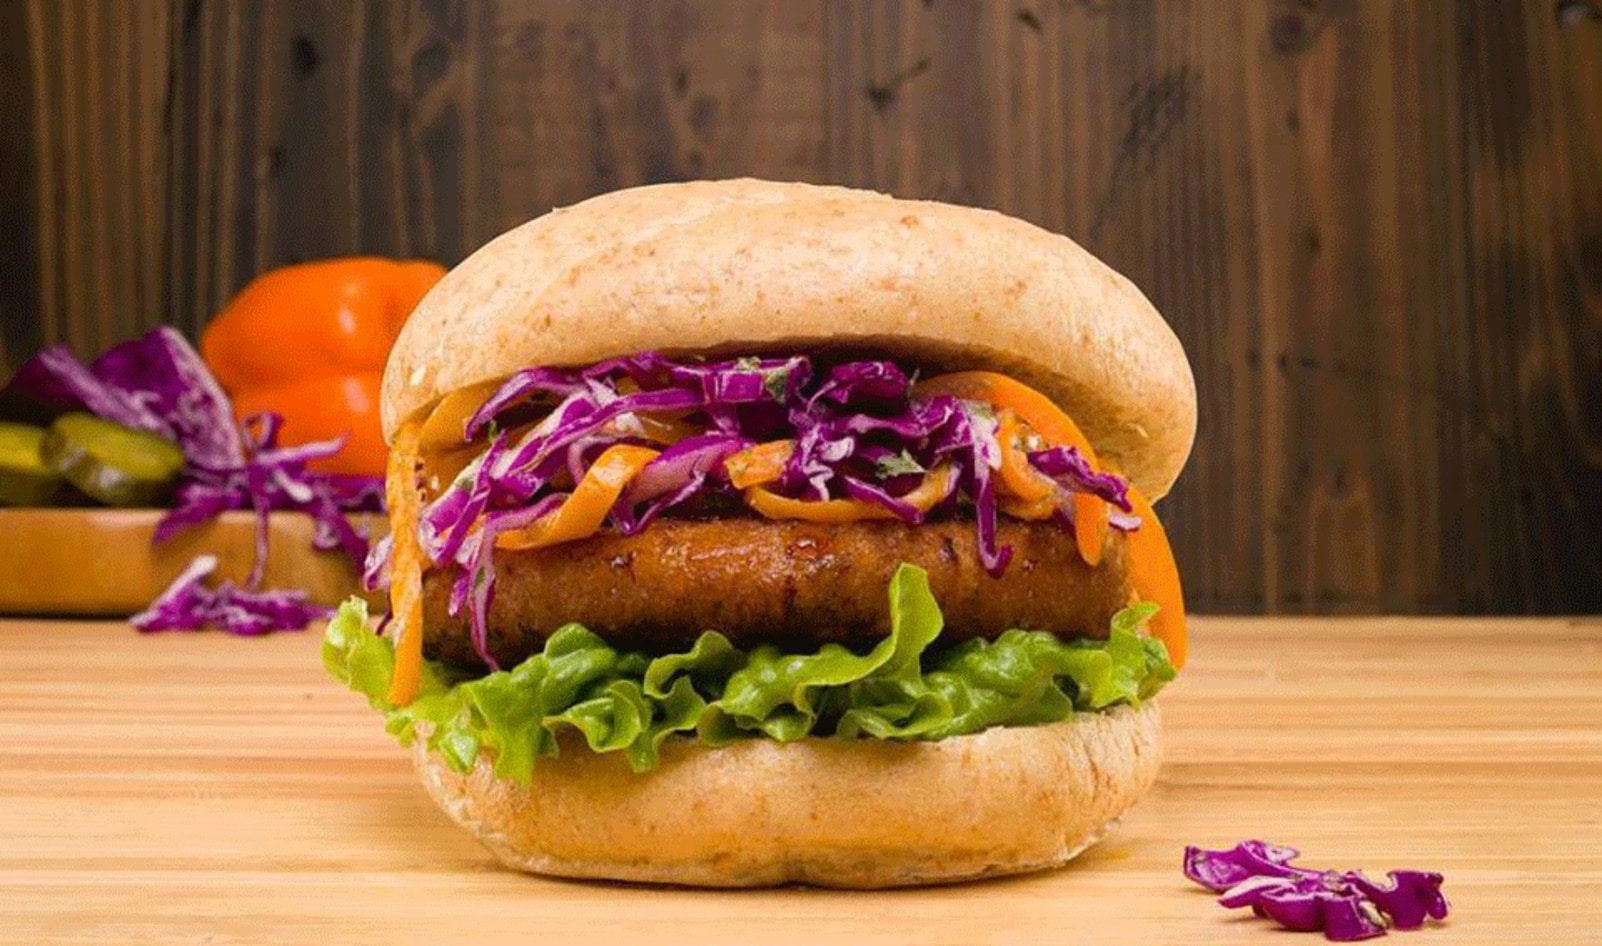 Meat Company Acquires Vegan Brand Before the Butcher